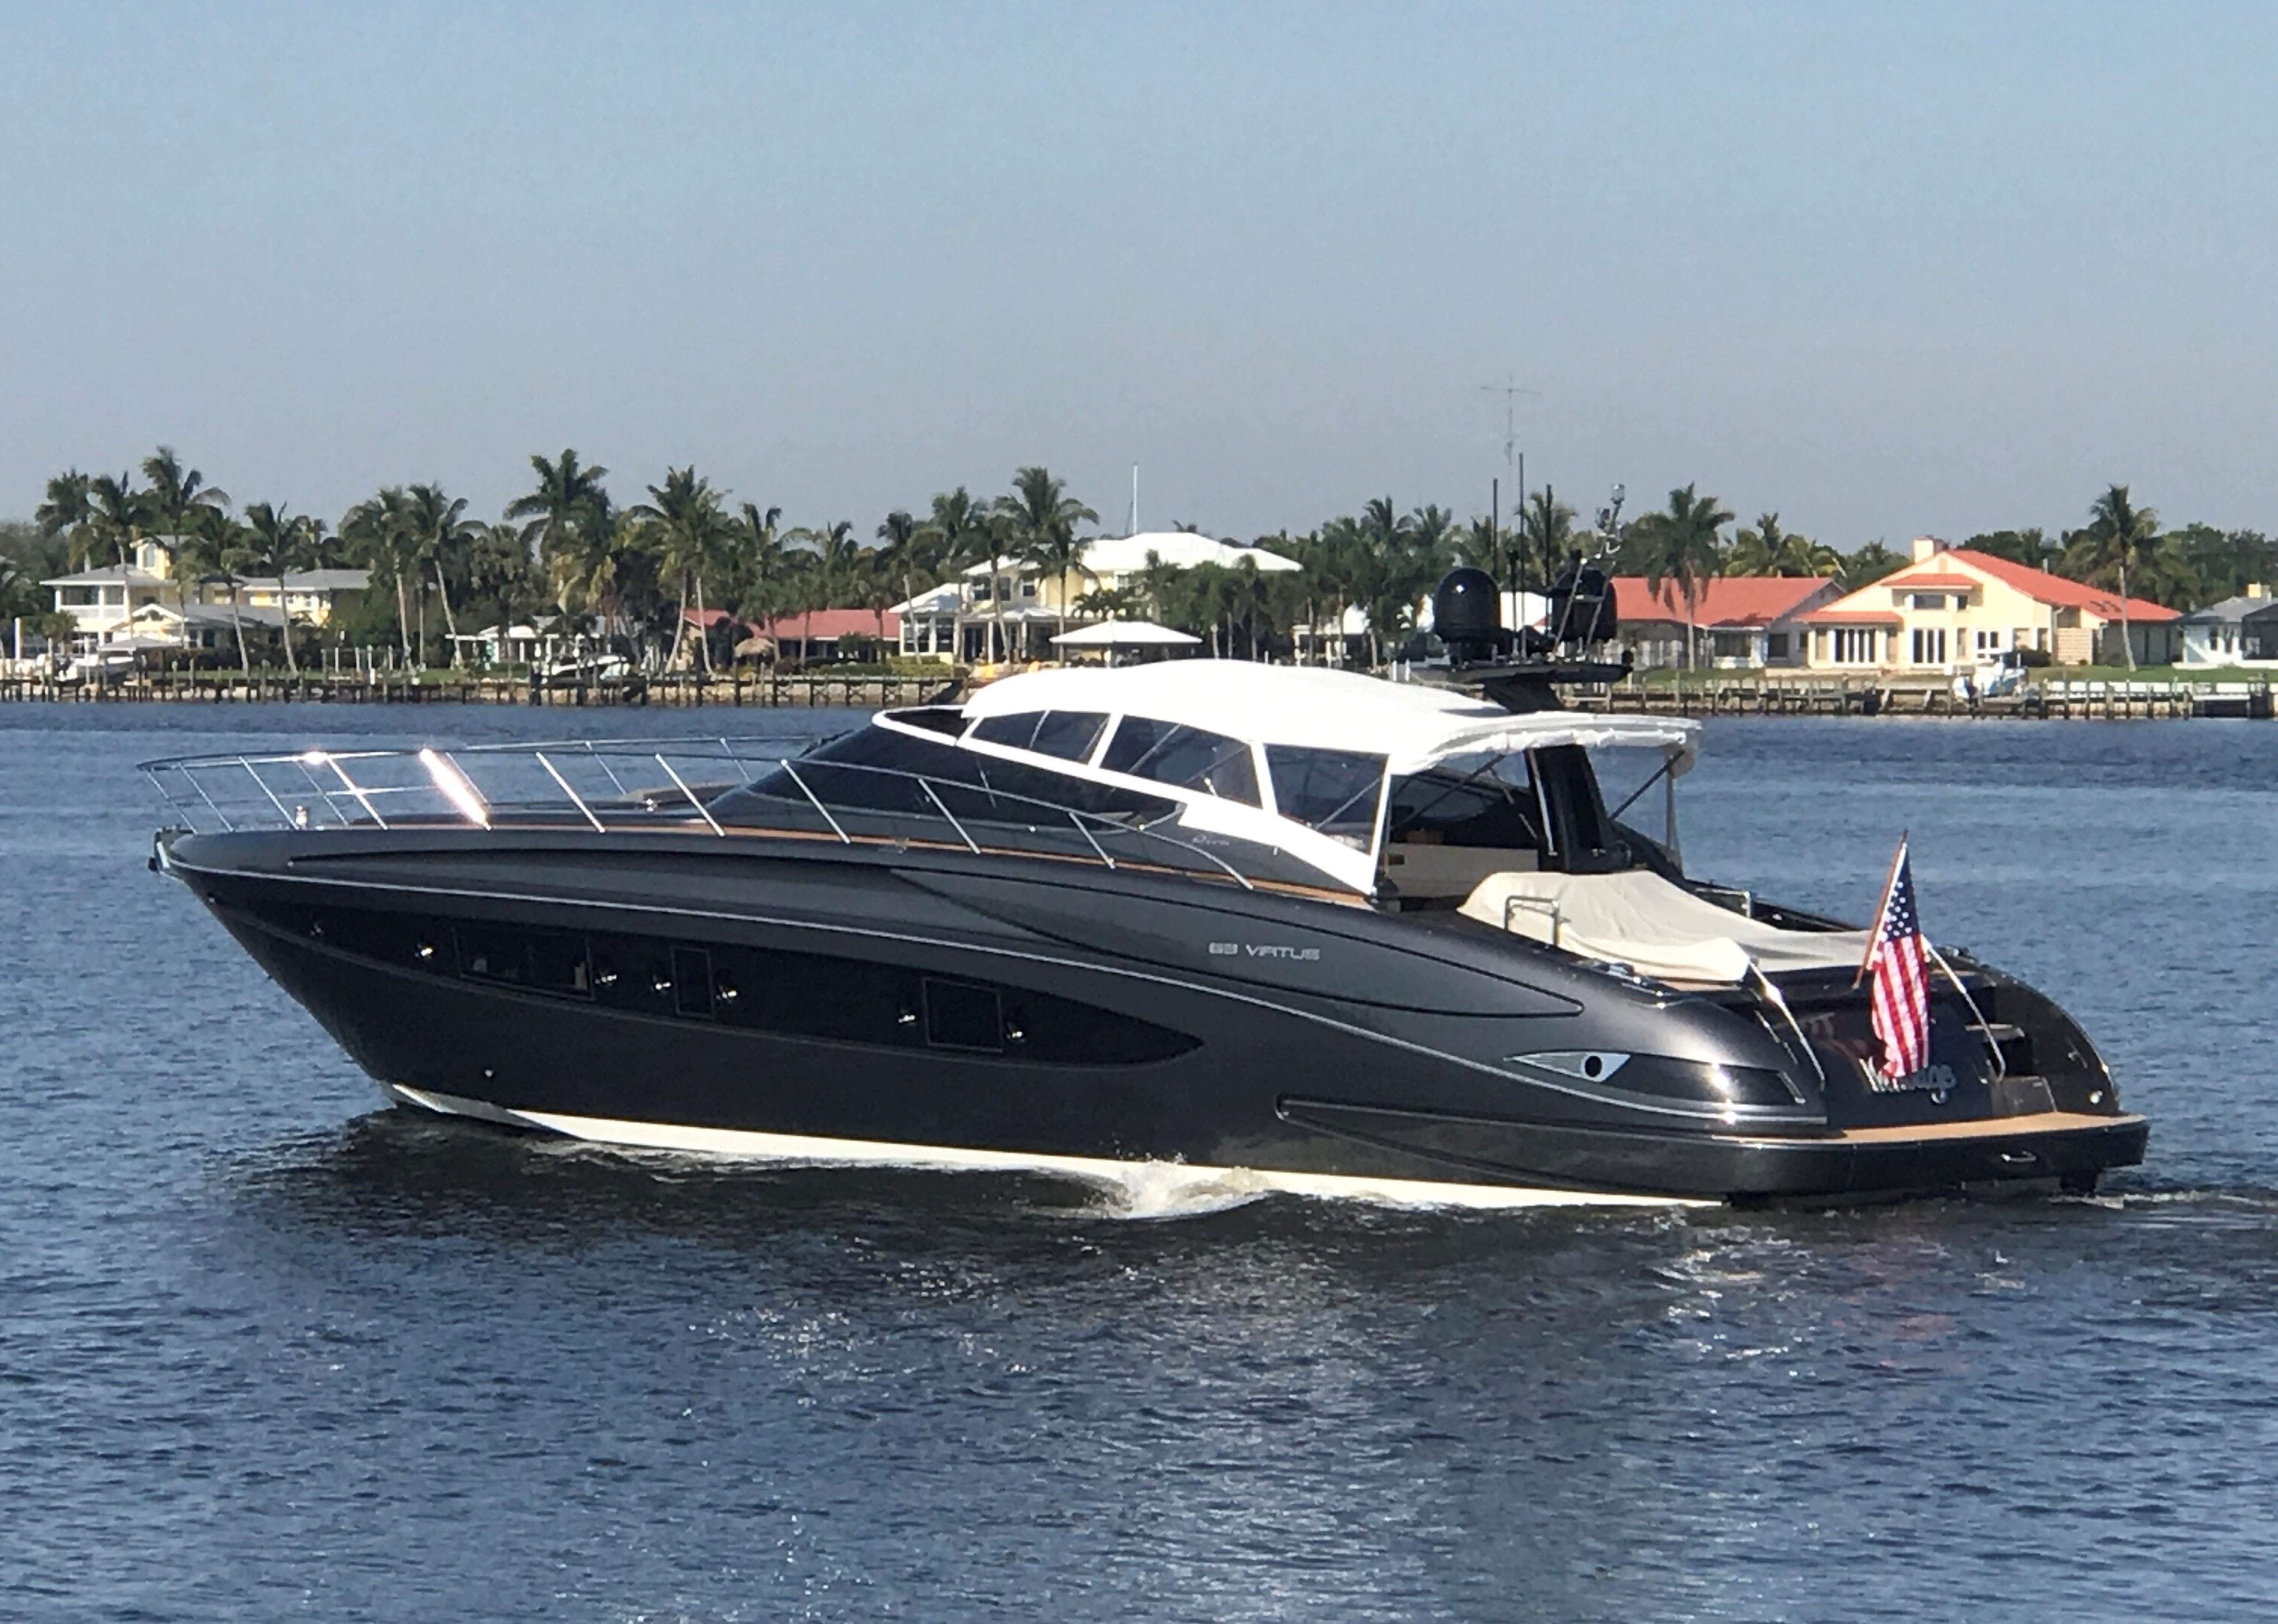 63 yacht for sale